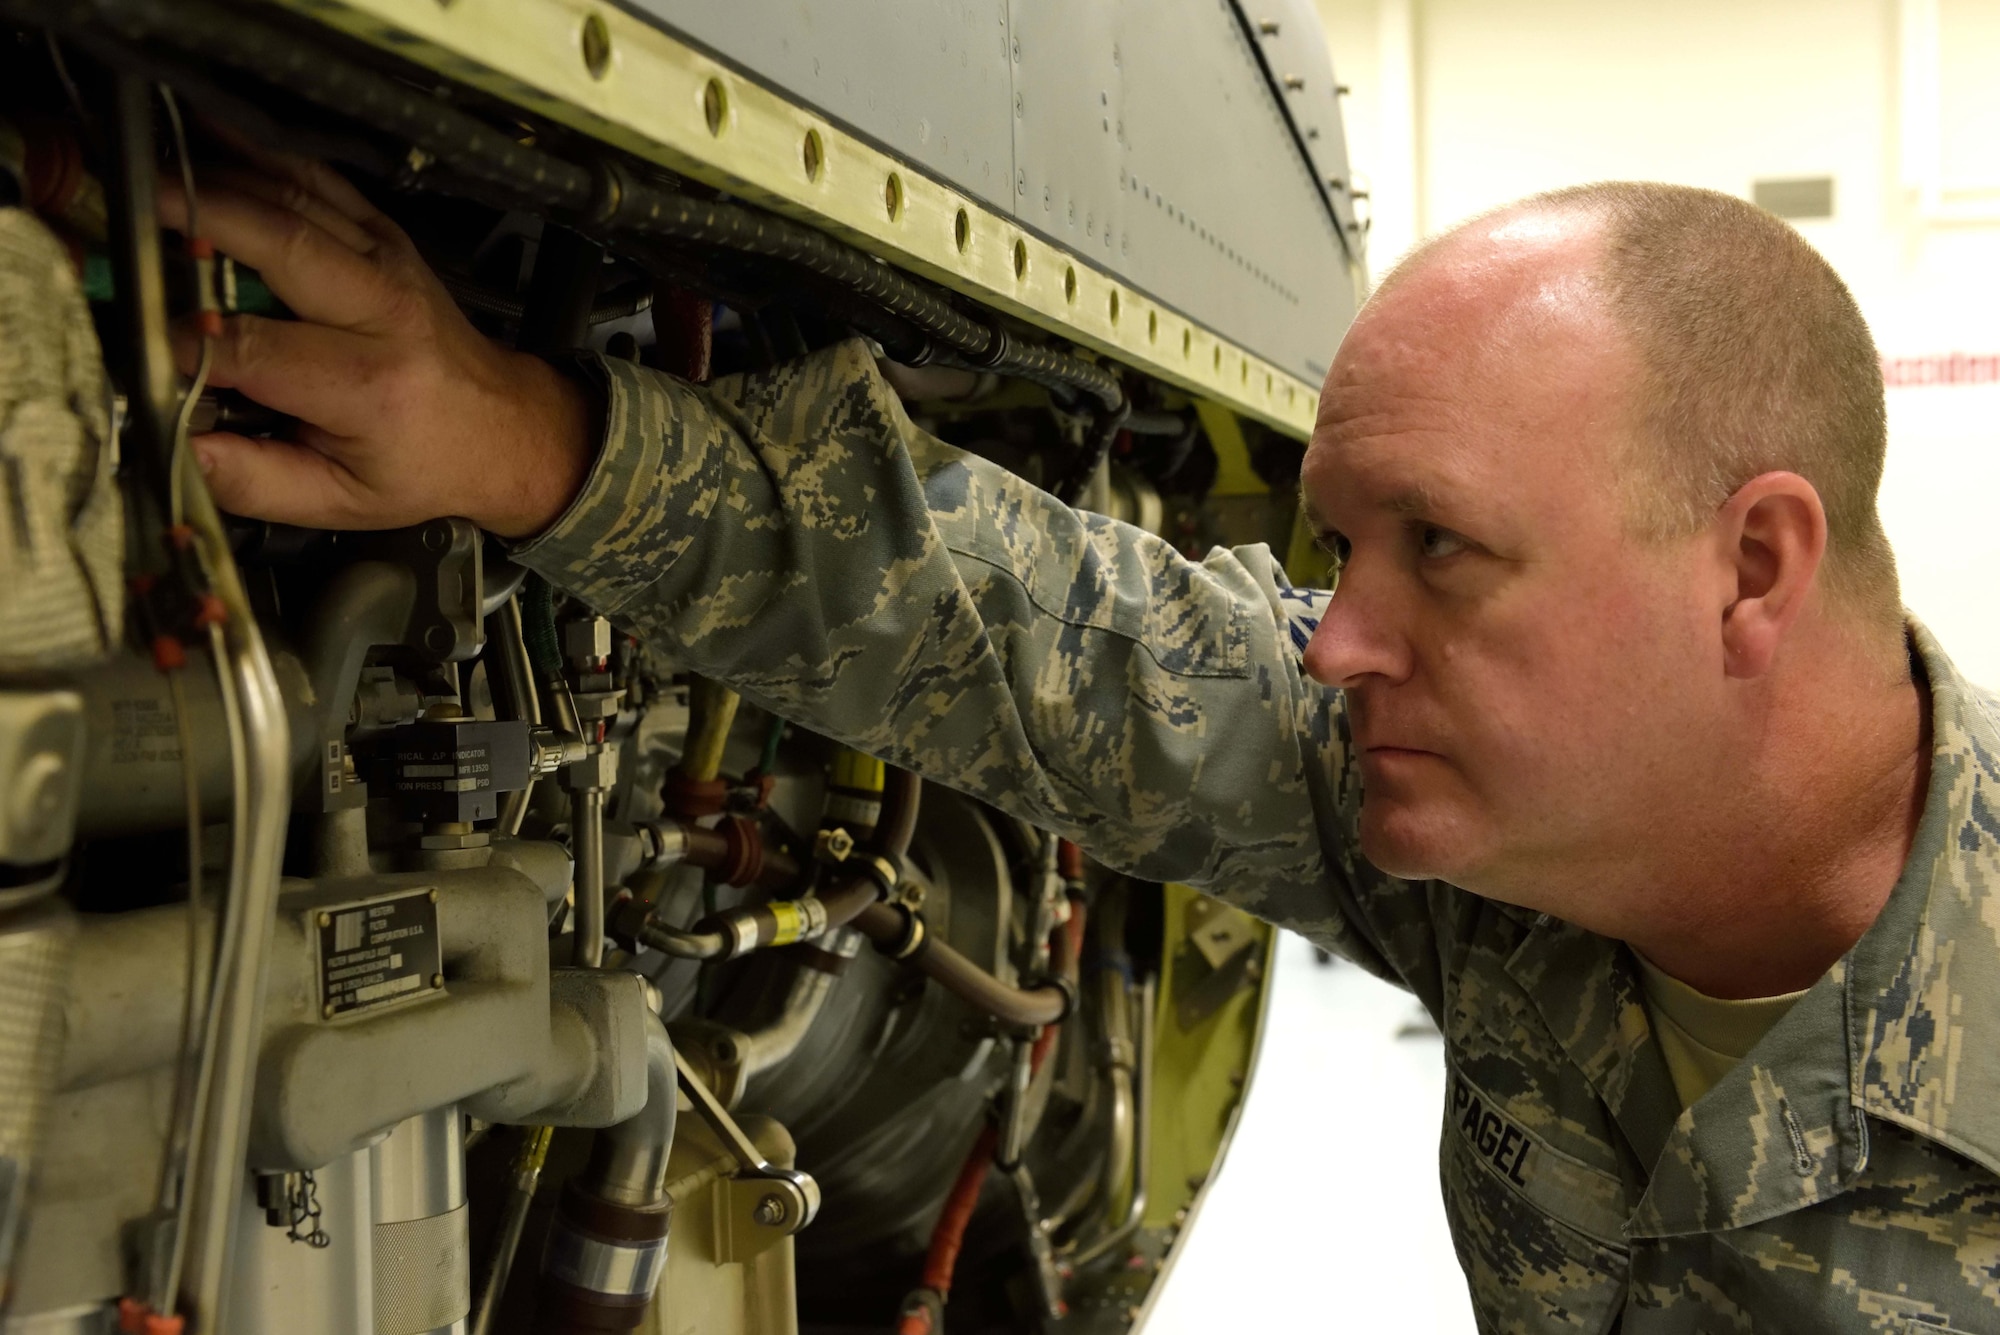 Staff Sgt. Timothy Pagel, 403rd Maintenance Squadron aerospace propulsion technician, inspects an engine removed from a C-130J in the Roberts Consolidated Aircraft Maintenance Facility at Keesler Air Force Base, Mississippi, Jan. 10, 2016. Pagel was one of several 403rd Wing members who served in the military during Operations Desert Shield and Desert Storm 25 years ago. (U.S. Air Force photo/Tec. Sgt. Ryan Labadens)